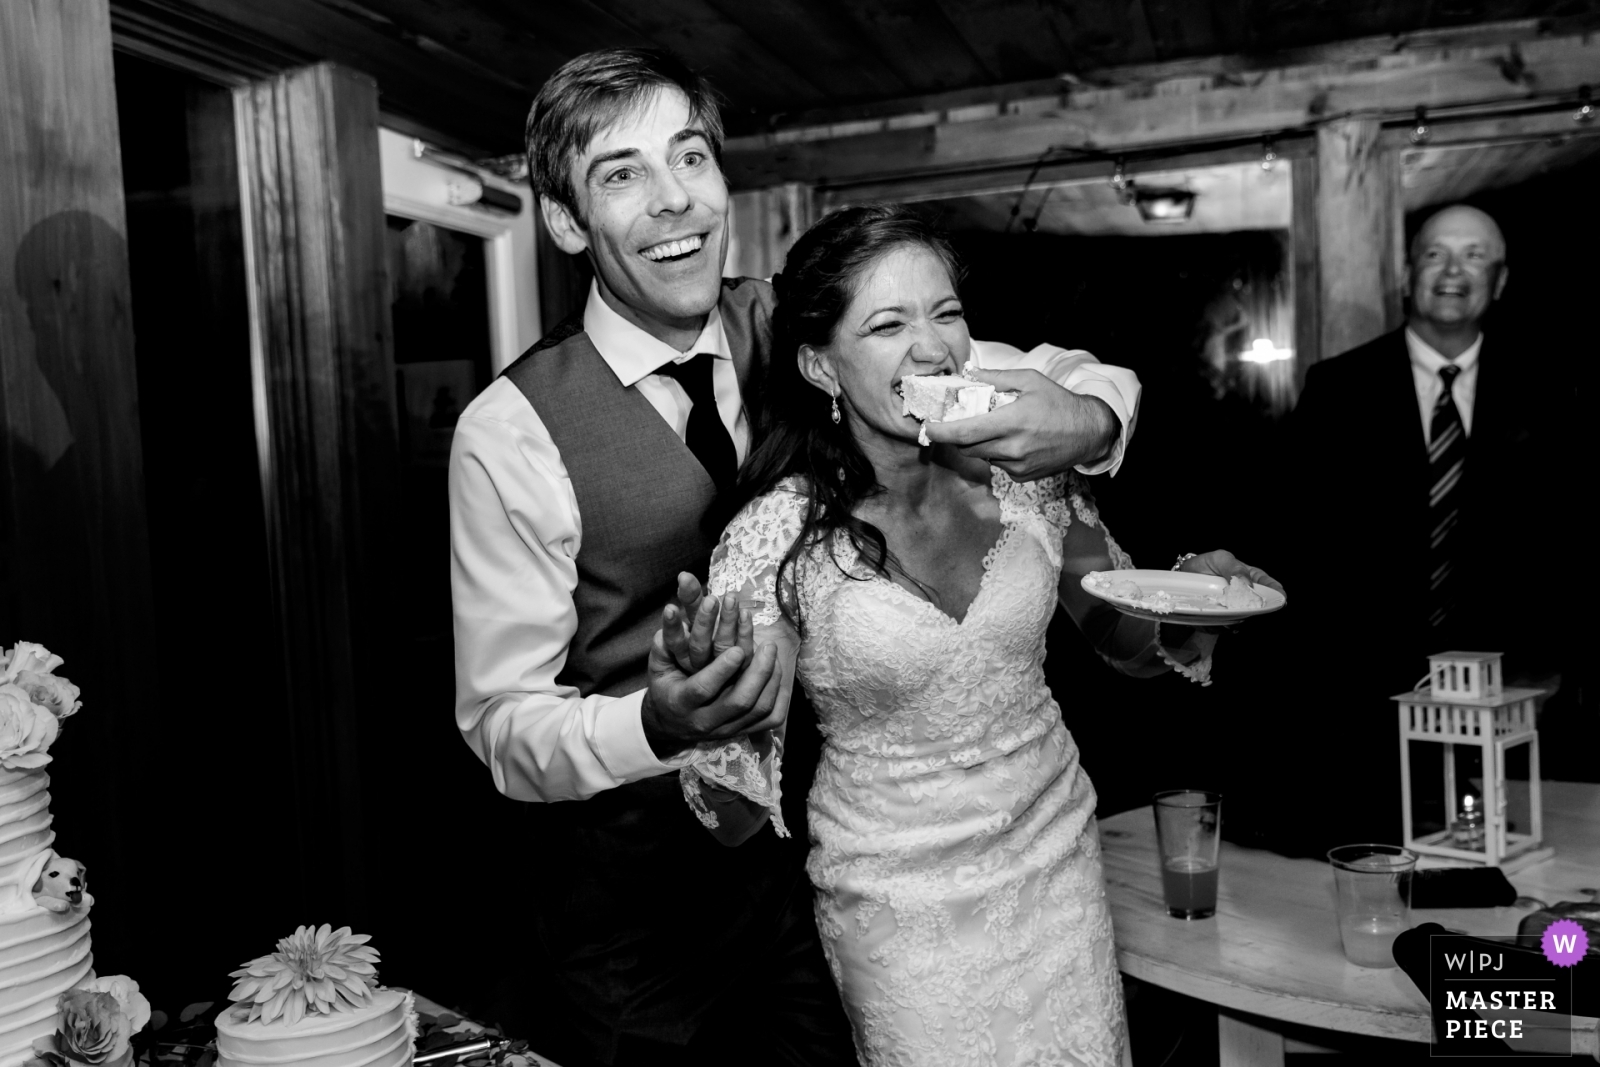 Linekin Bay Resort Boothbay Maine Wedding Photographer the bride and groom share a piece of cake in this award winning image